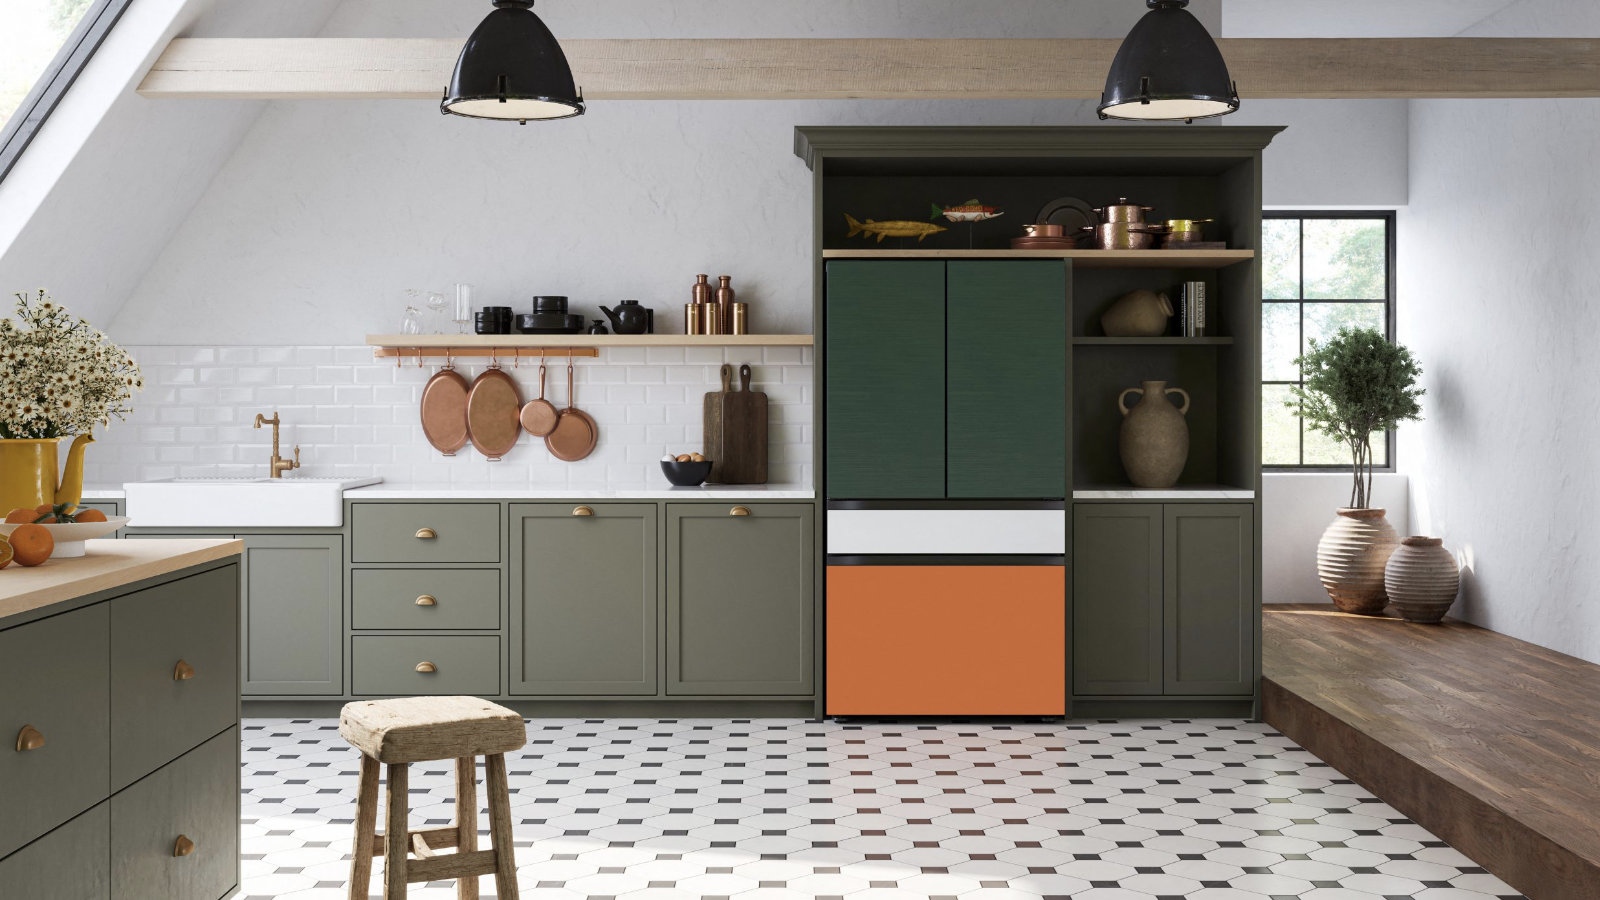 Pink, mustard, olive green - who said the fridge has to be boring?